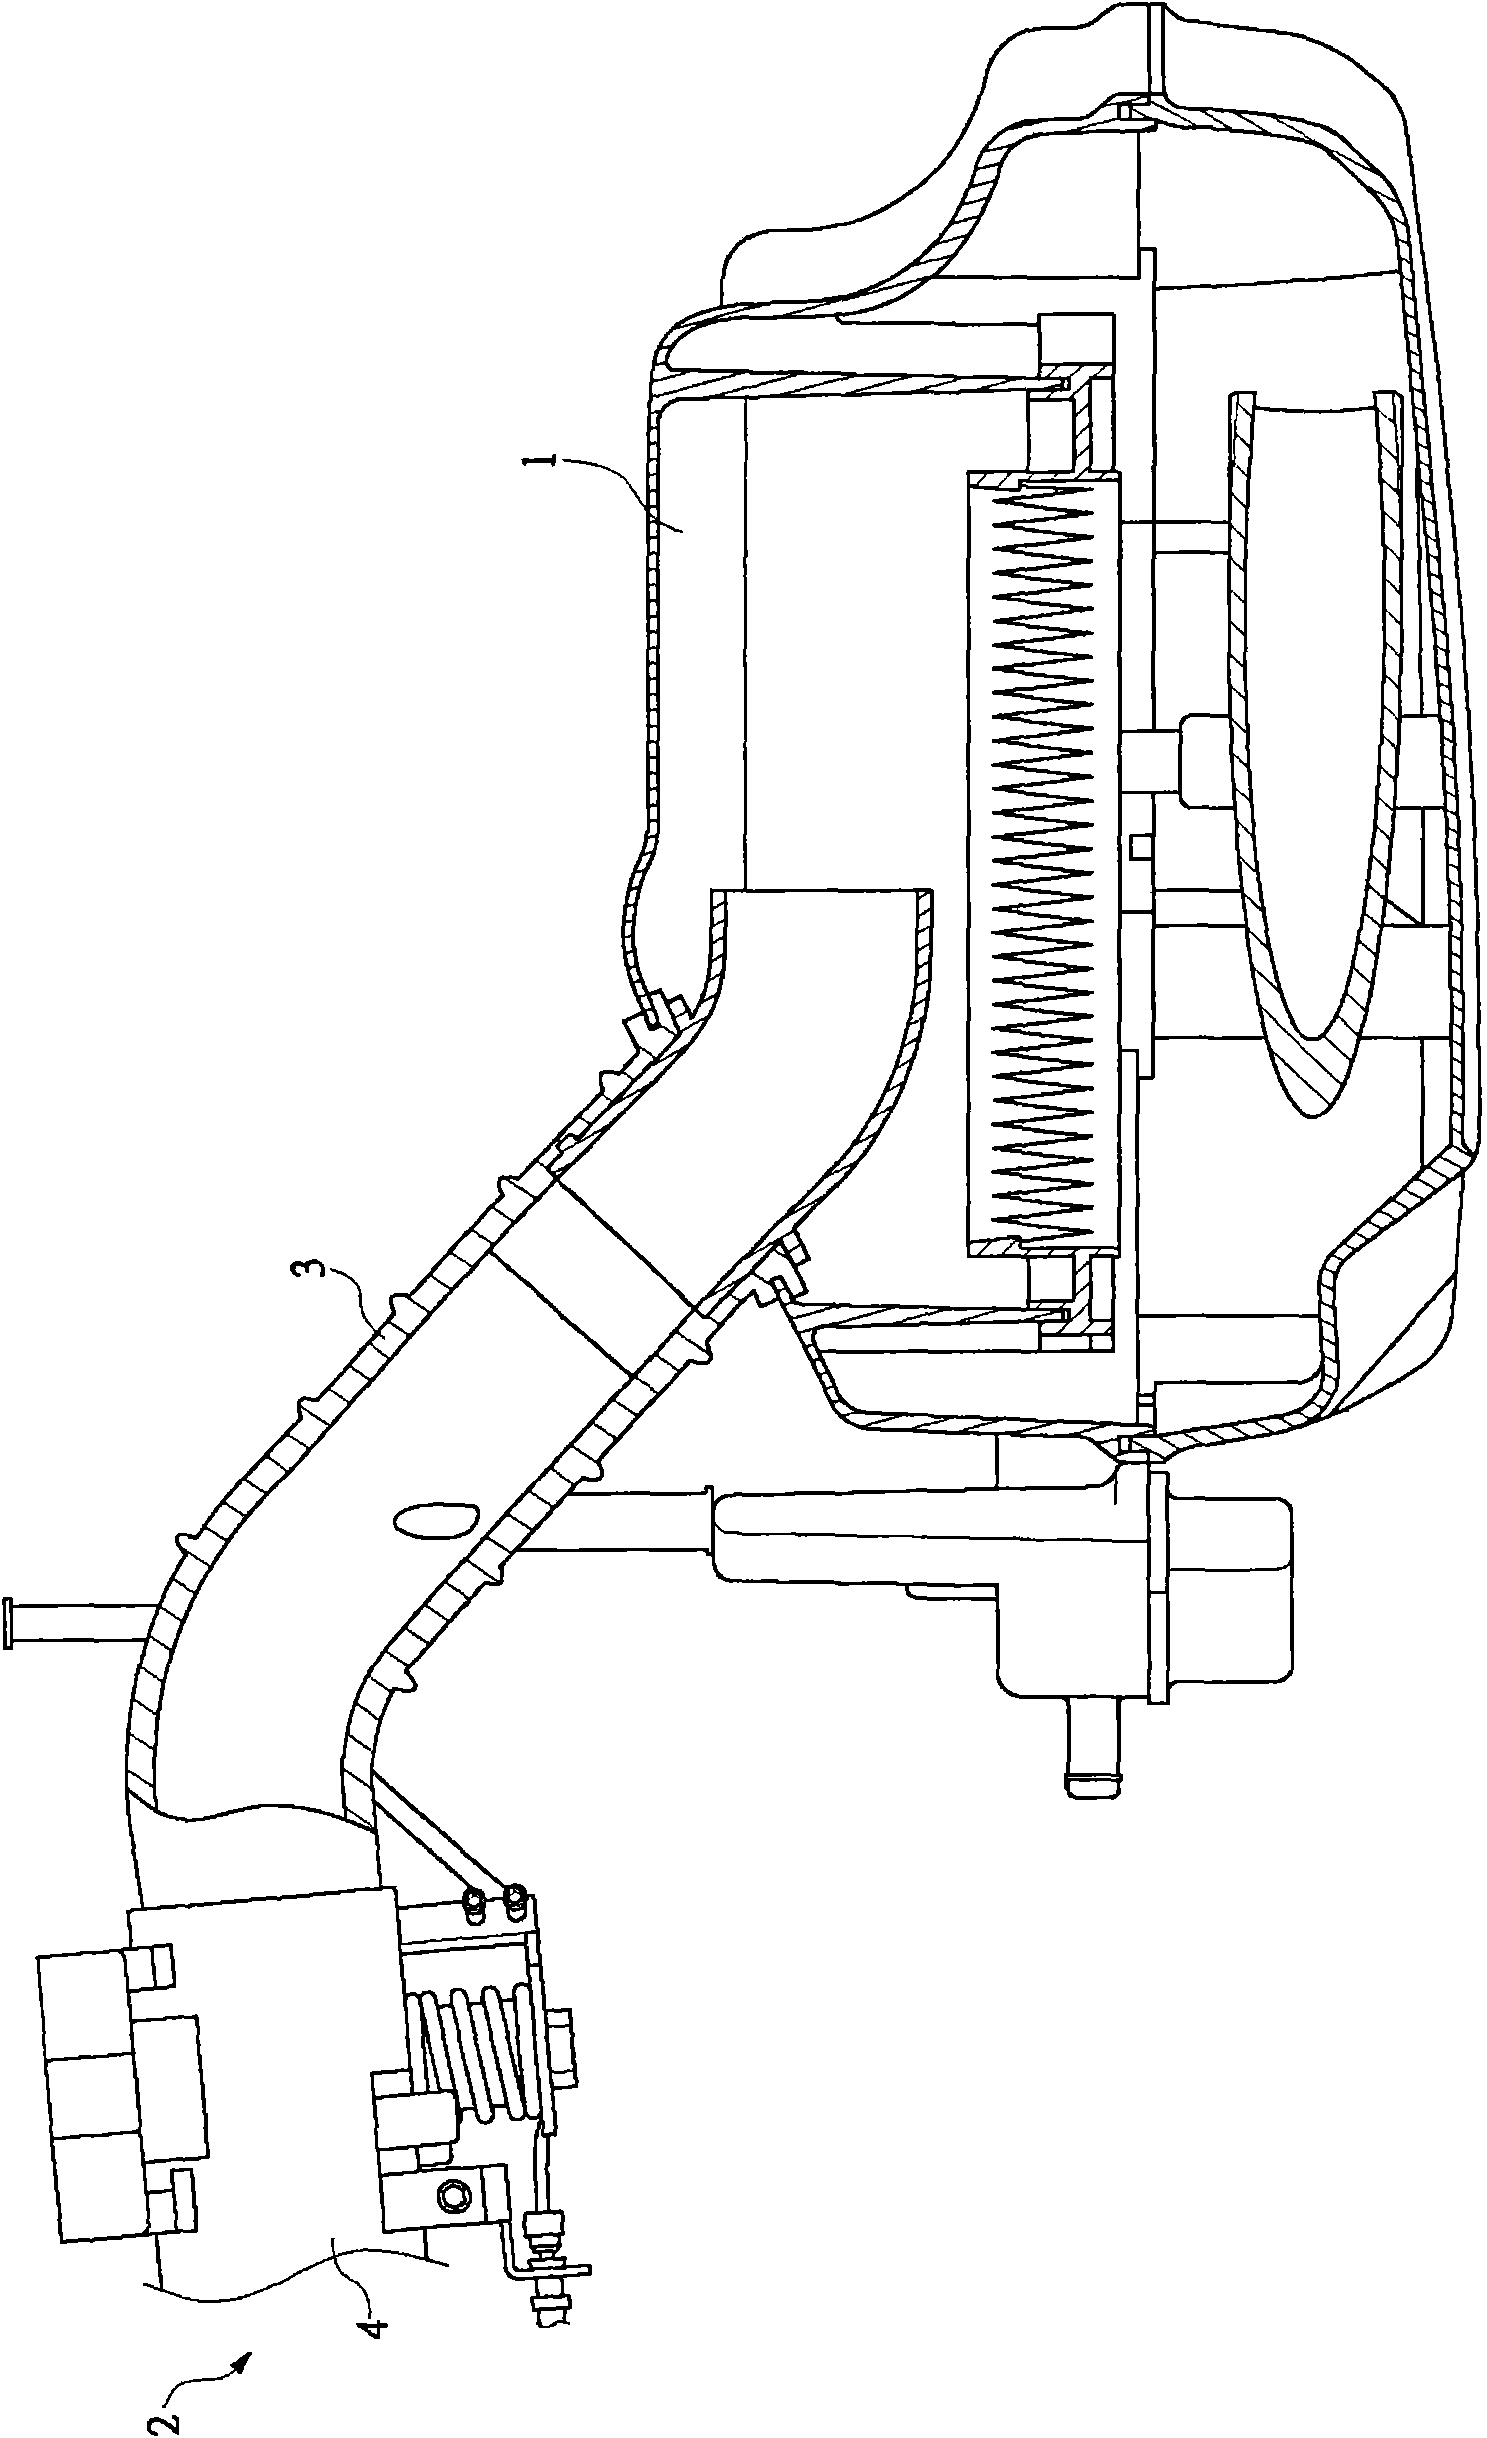 Variable air inflow structure of engine